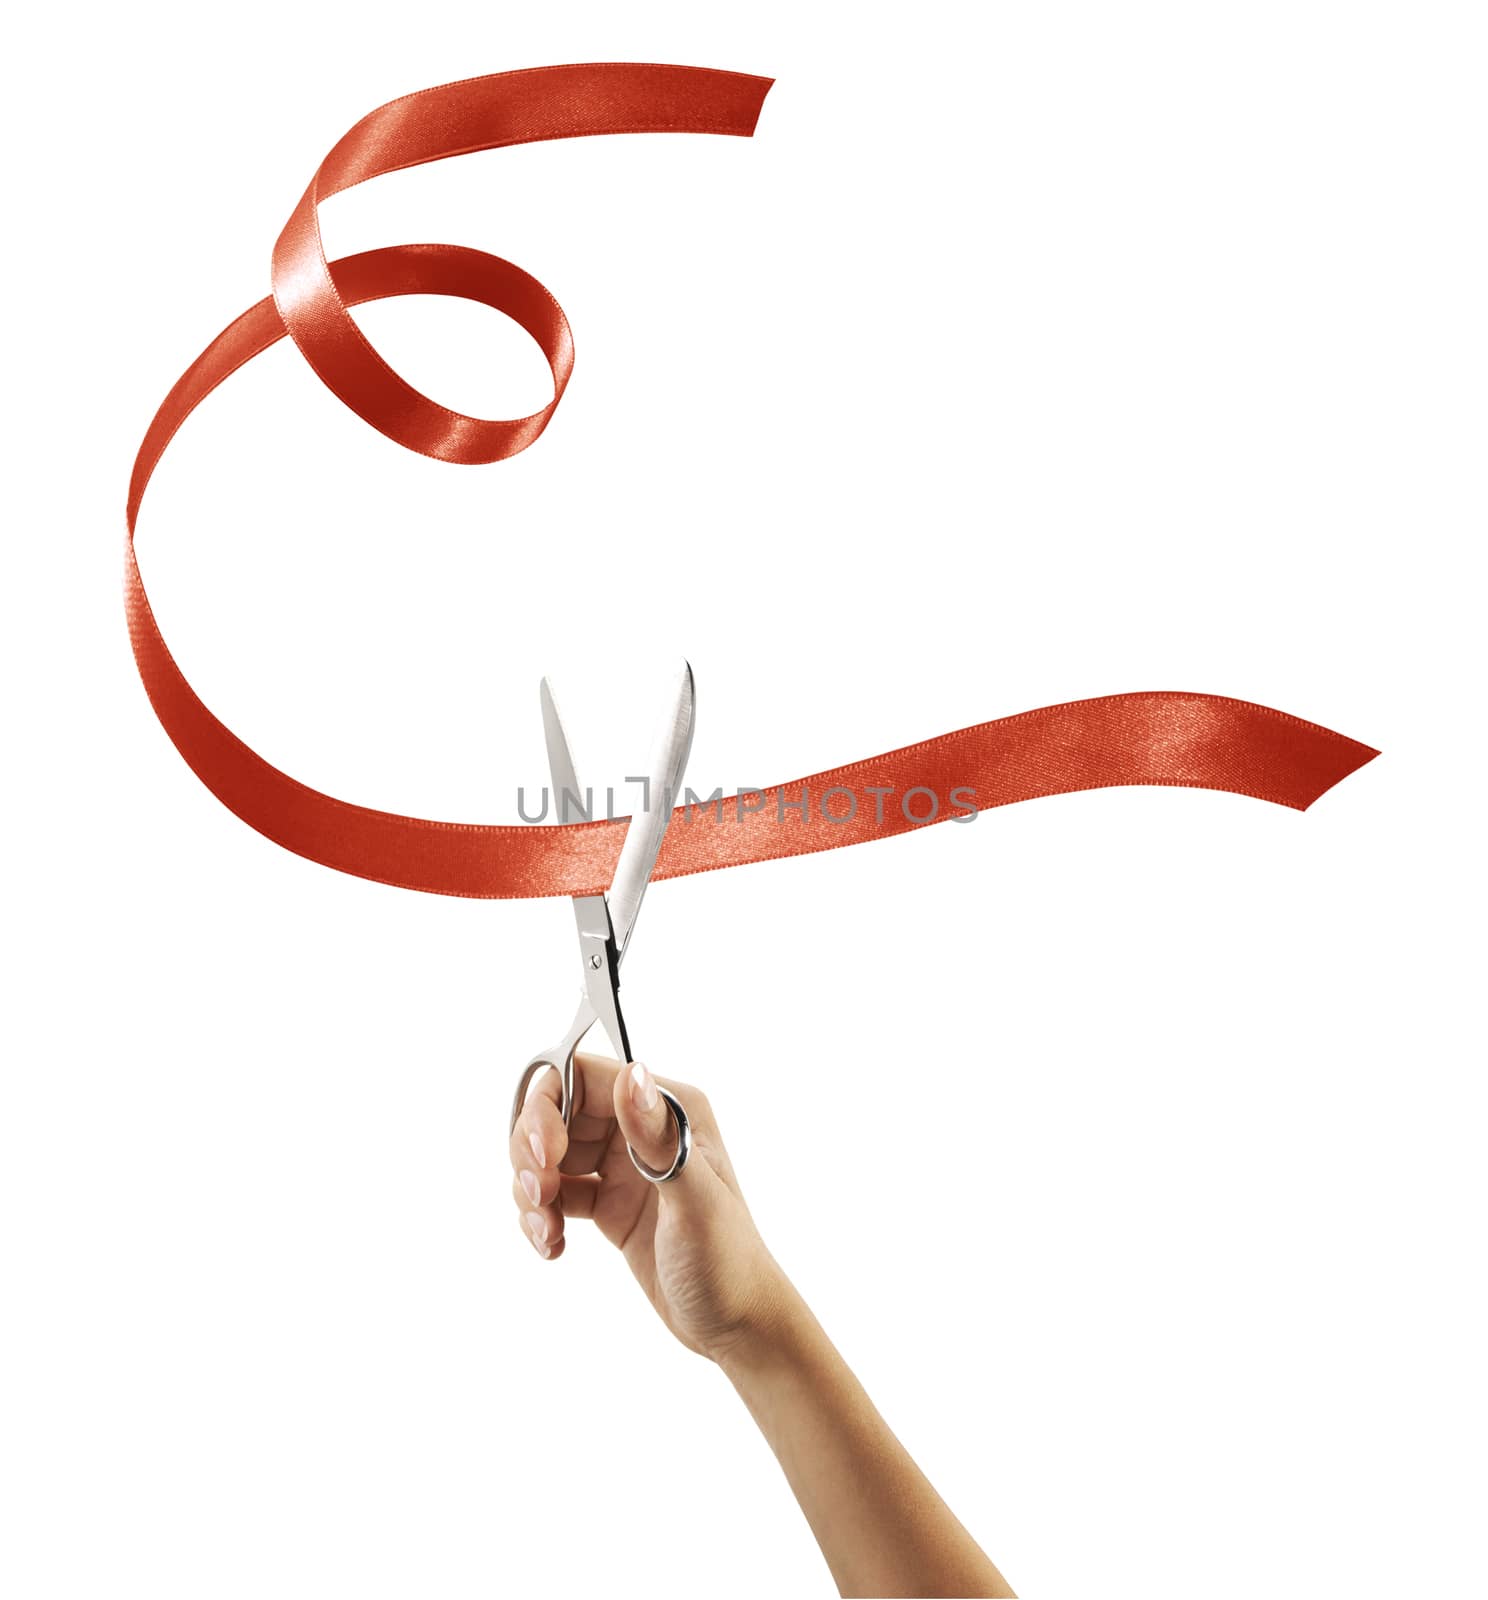 Scissors cutting through red ribbon or tape by janssenkruseproductions